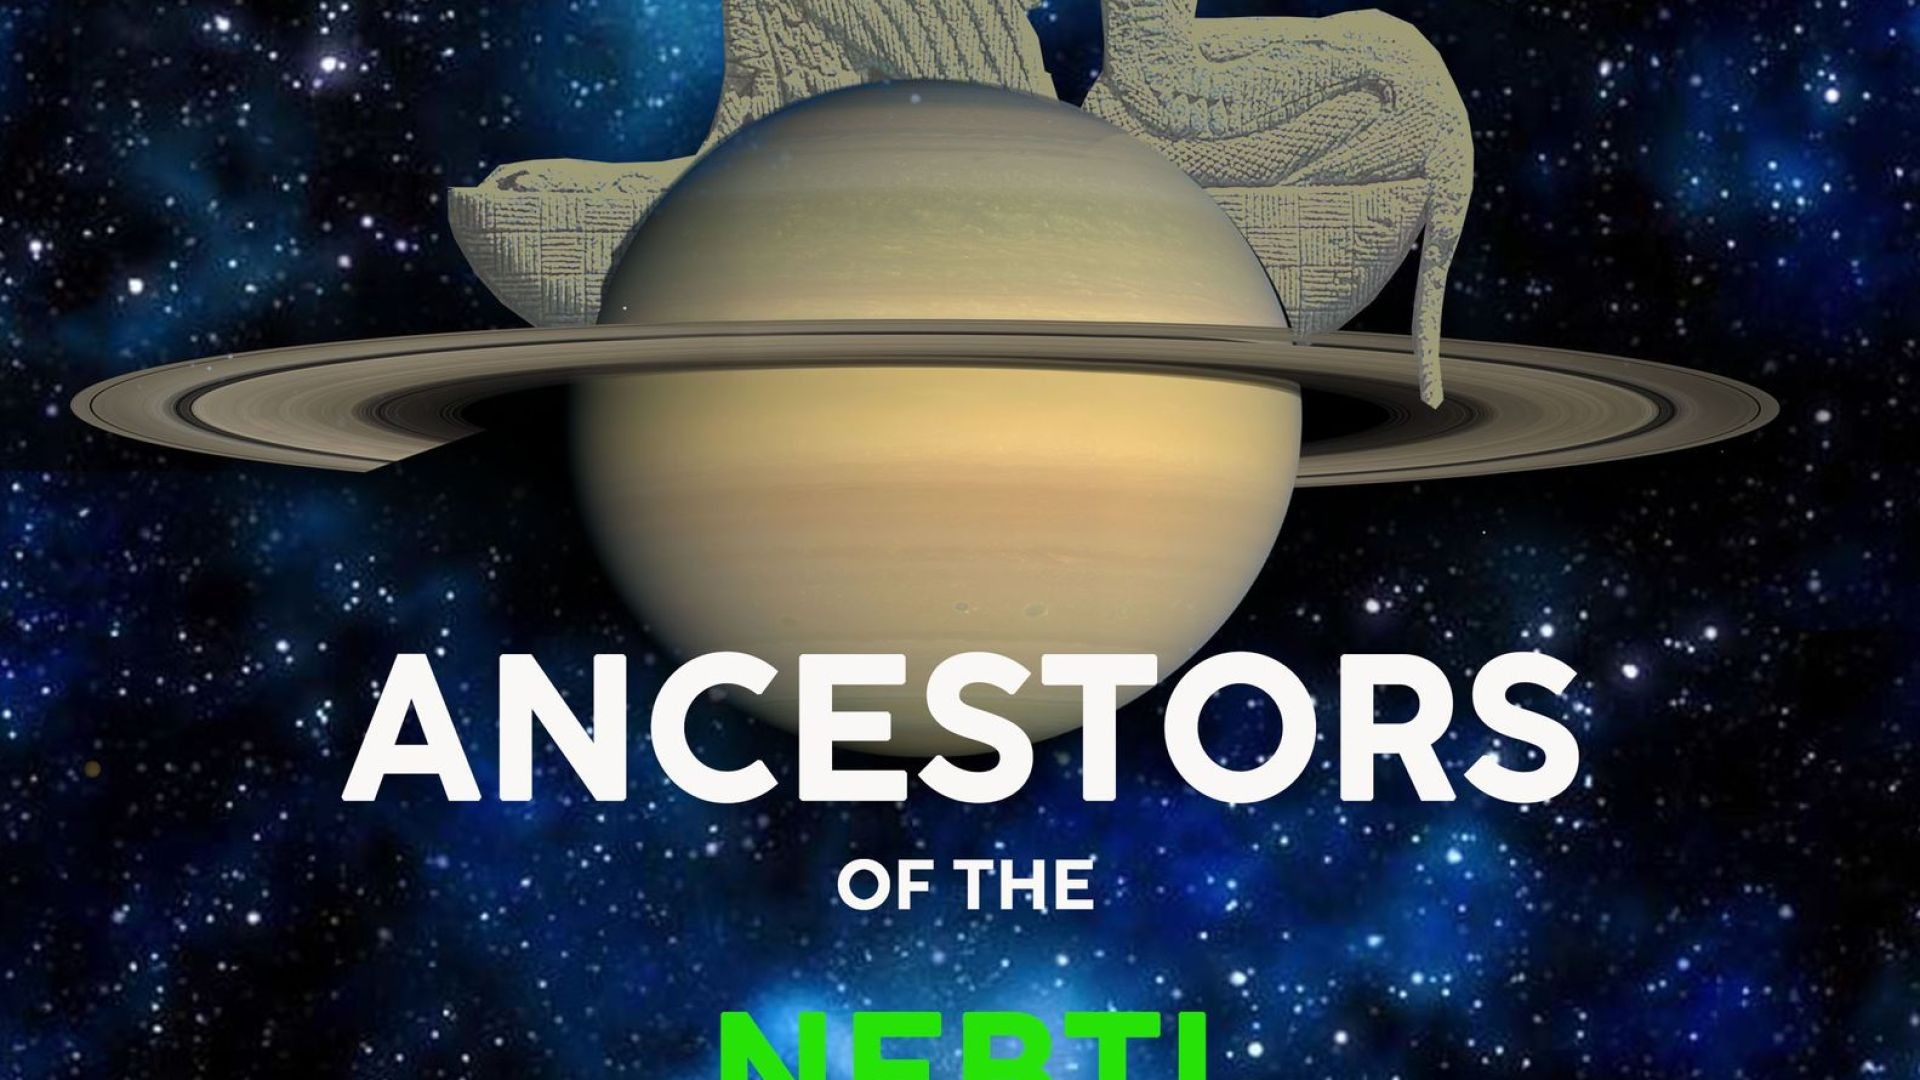 Ancestors of the NEBTI: Protecting and Empowering the Afrakan Bloodlines 🎧 Full Audiobook